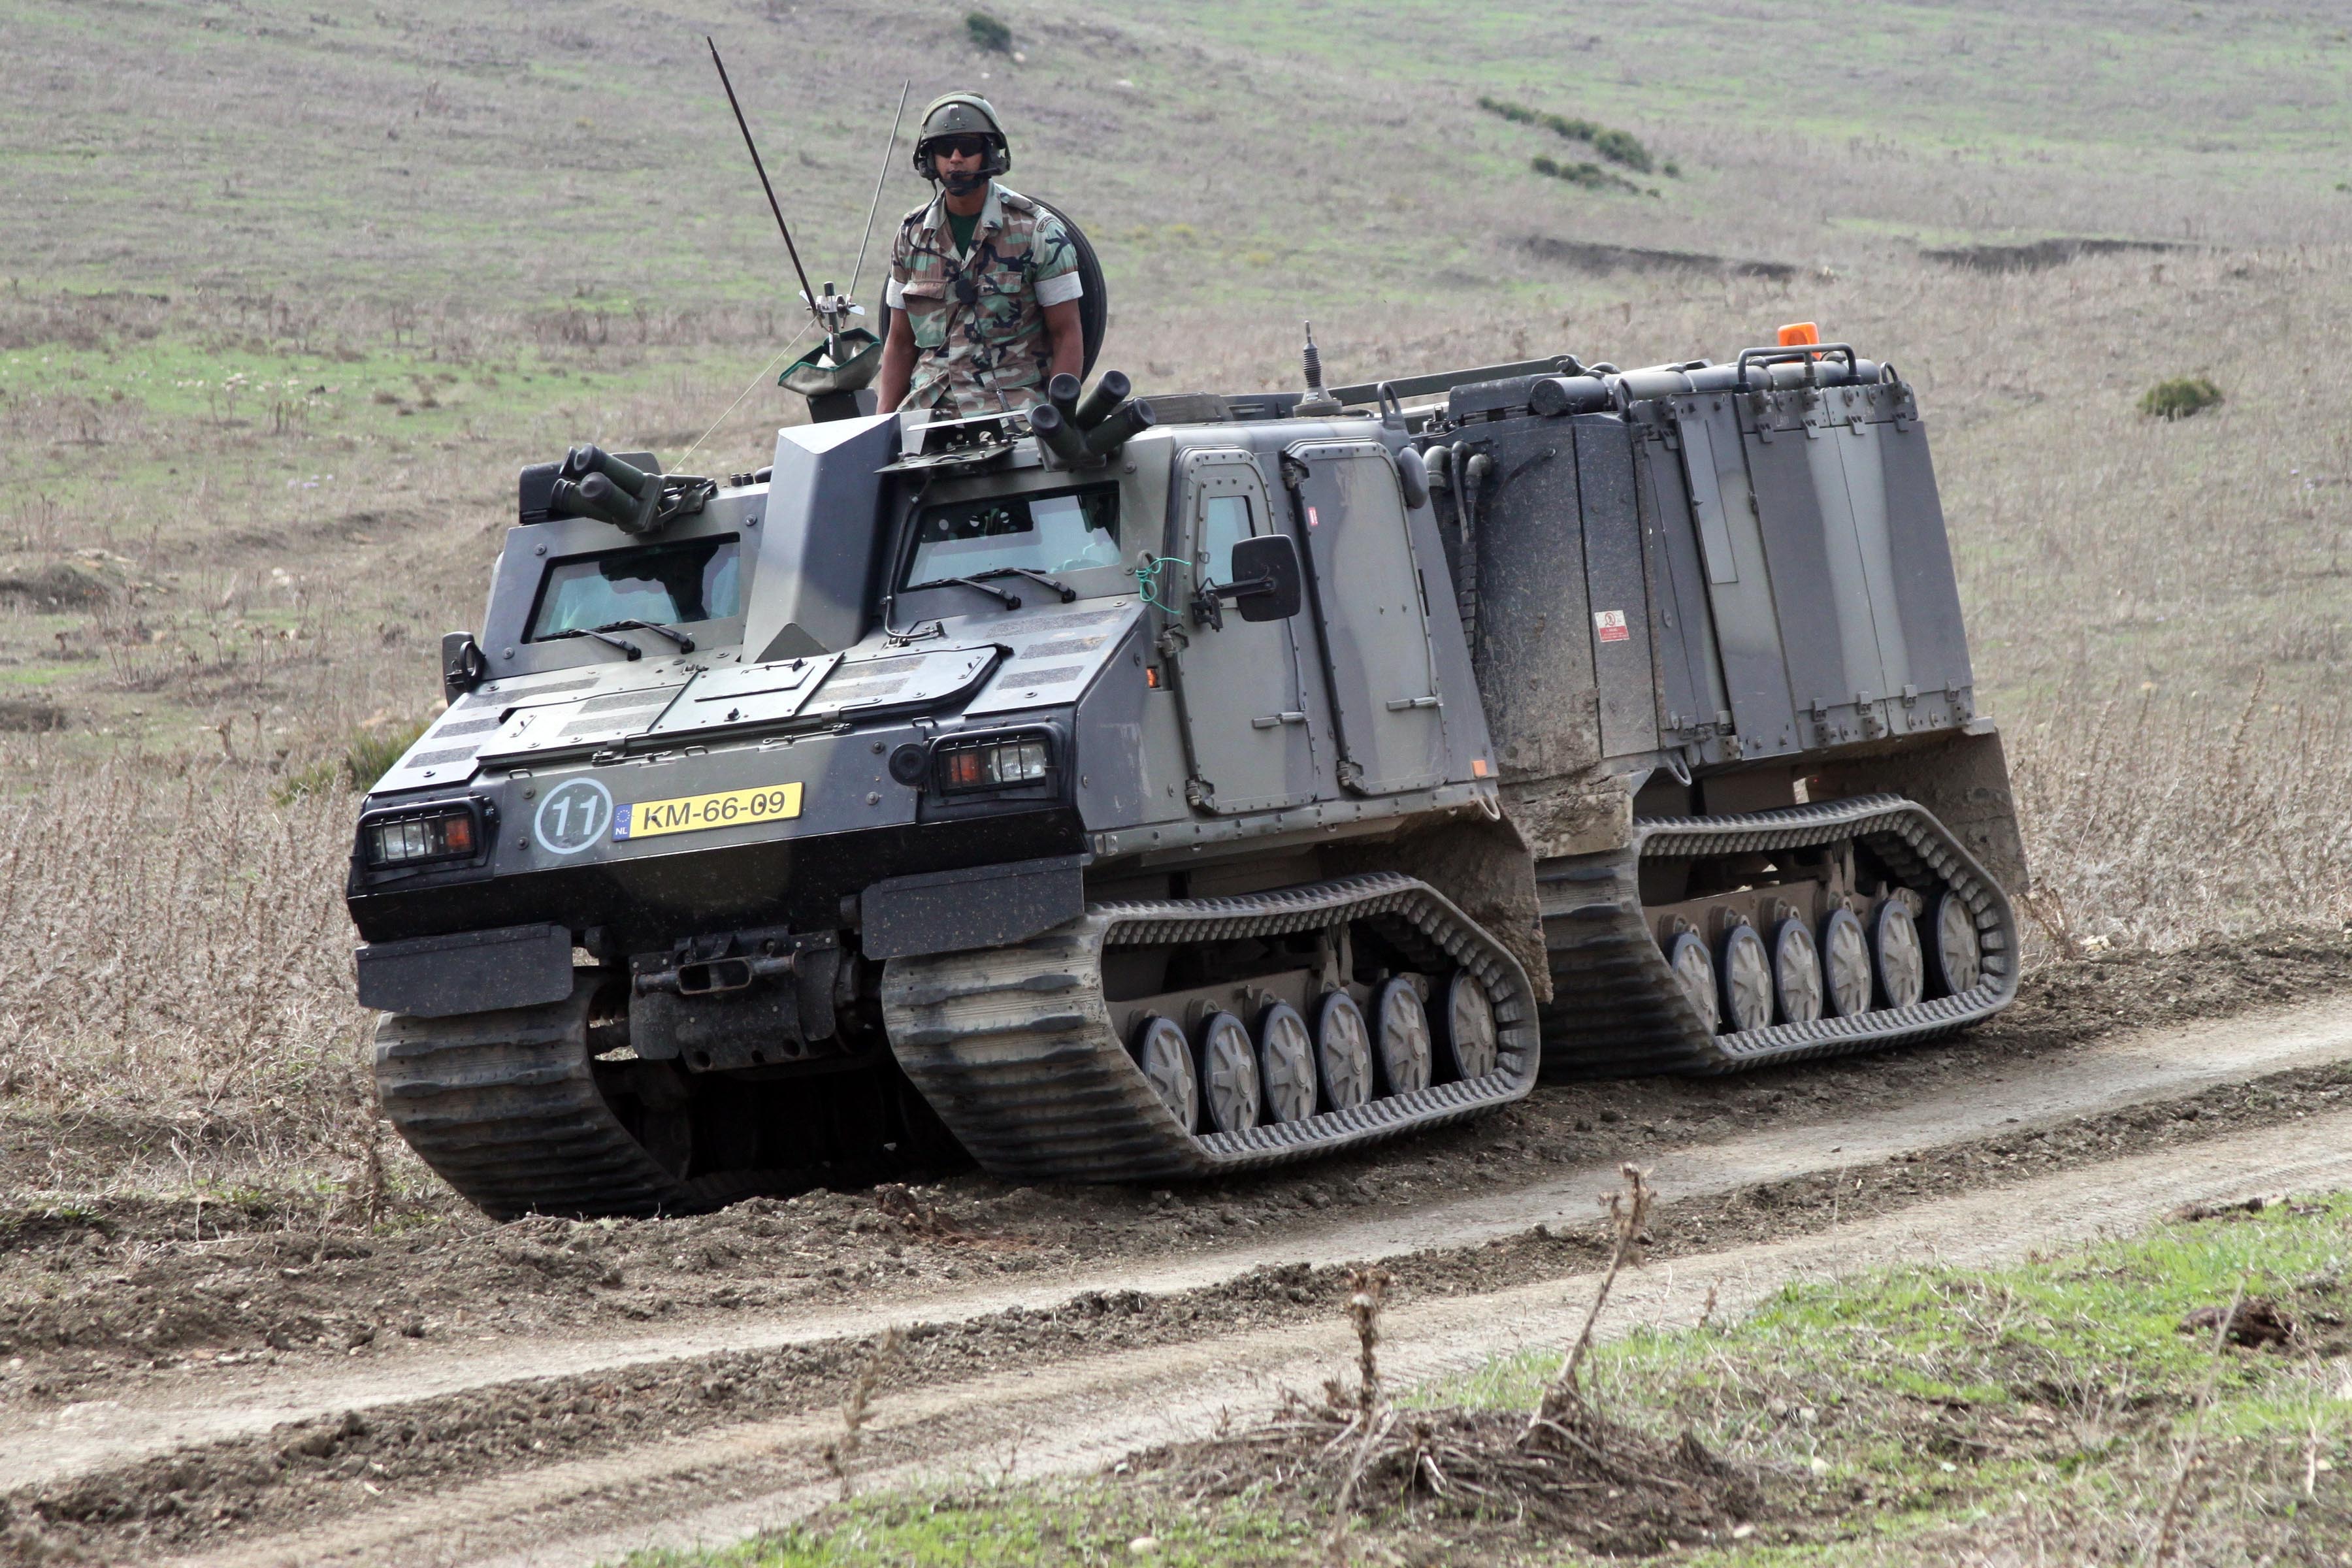 Netherlands shows how AFU learns to use BvS 10 all-terrain vehicles